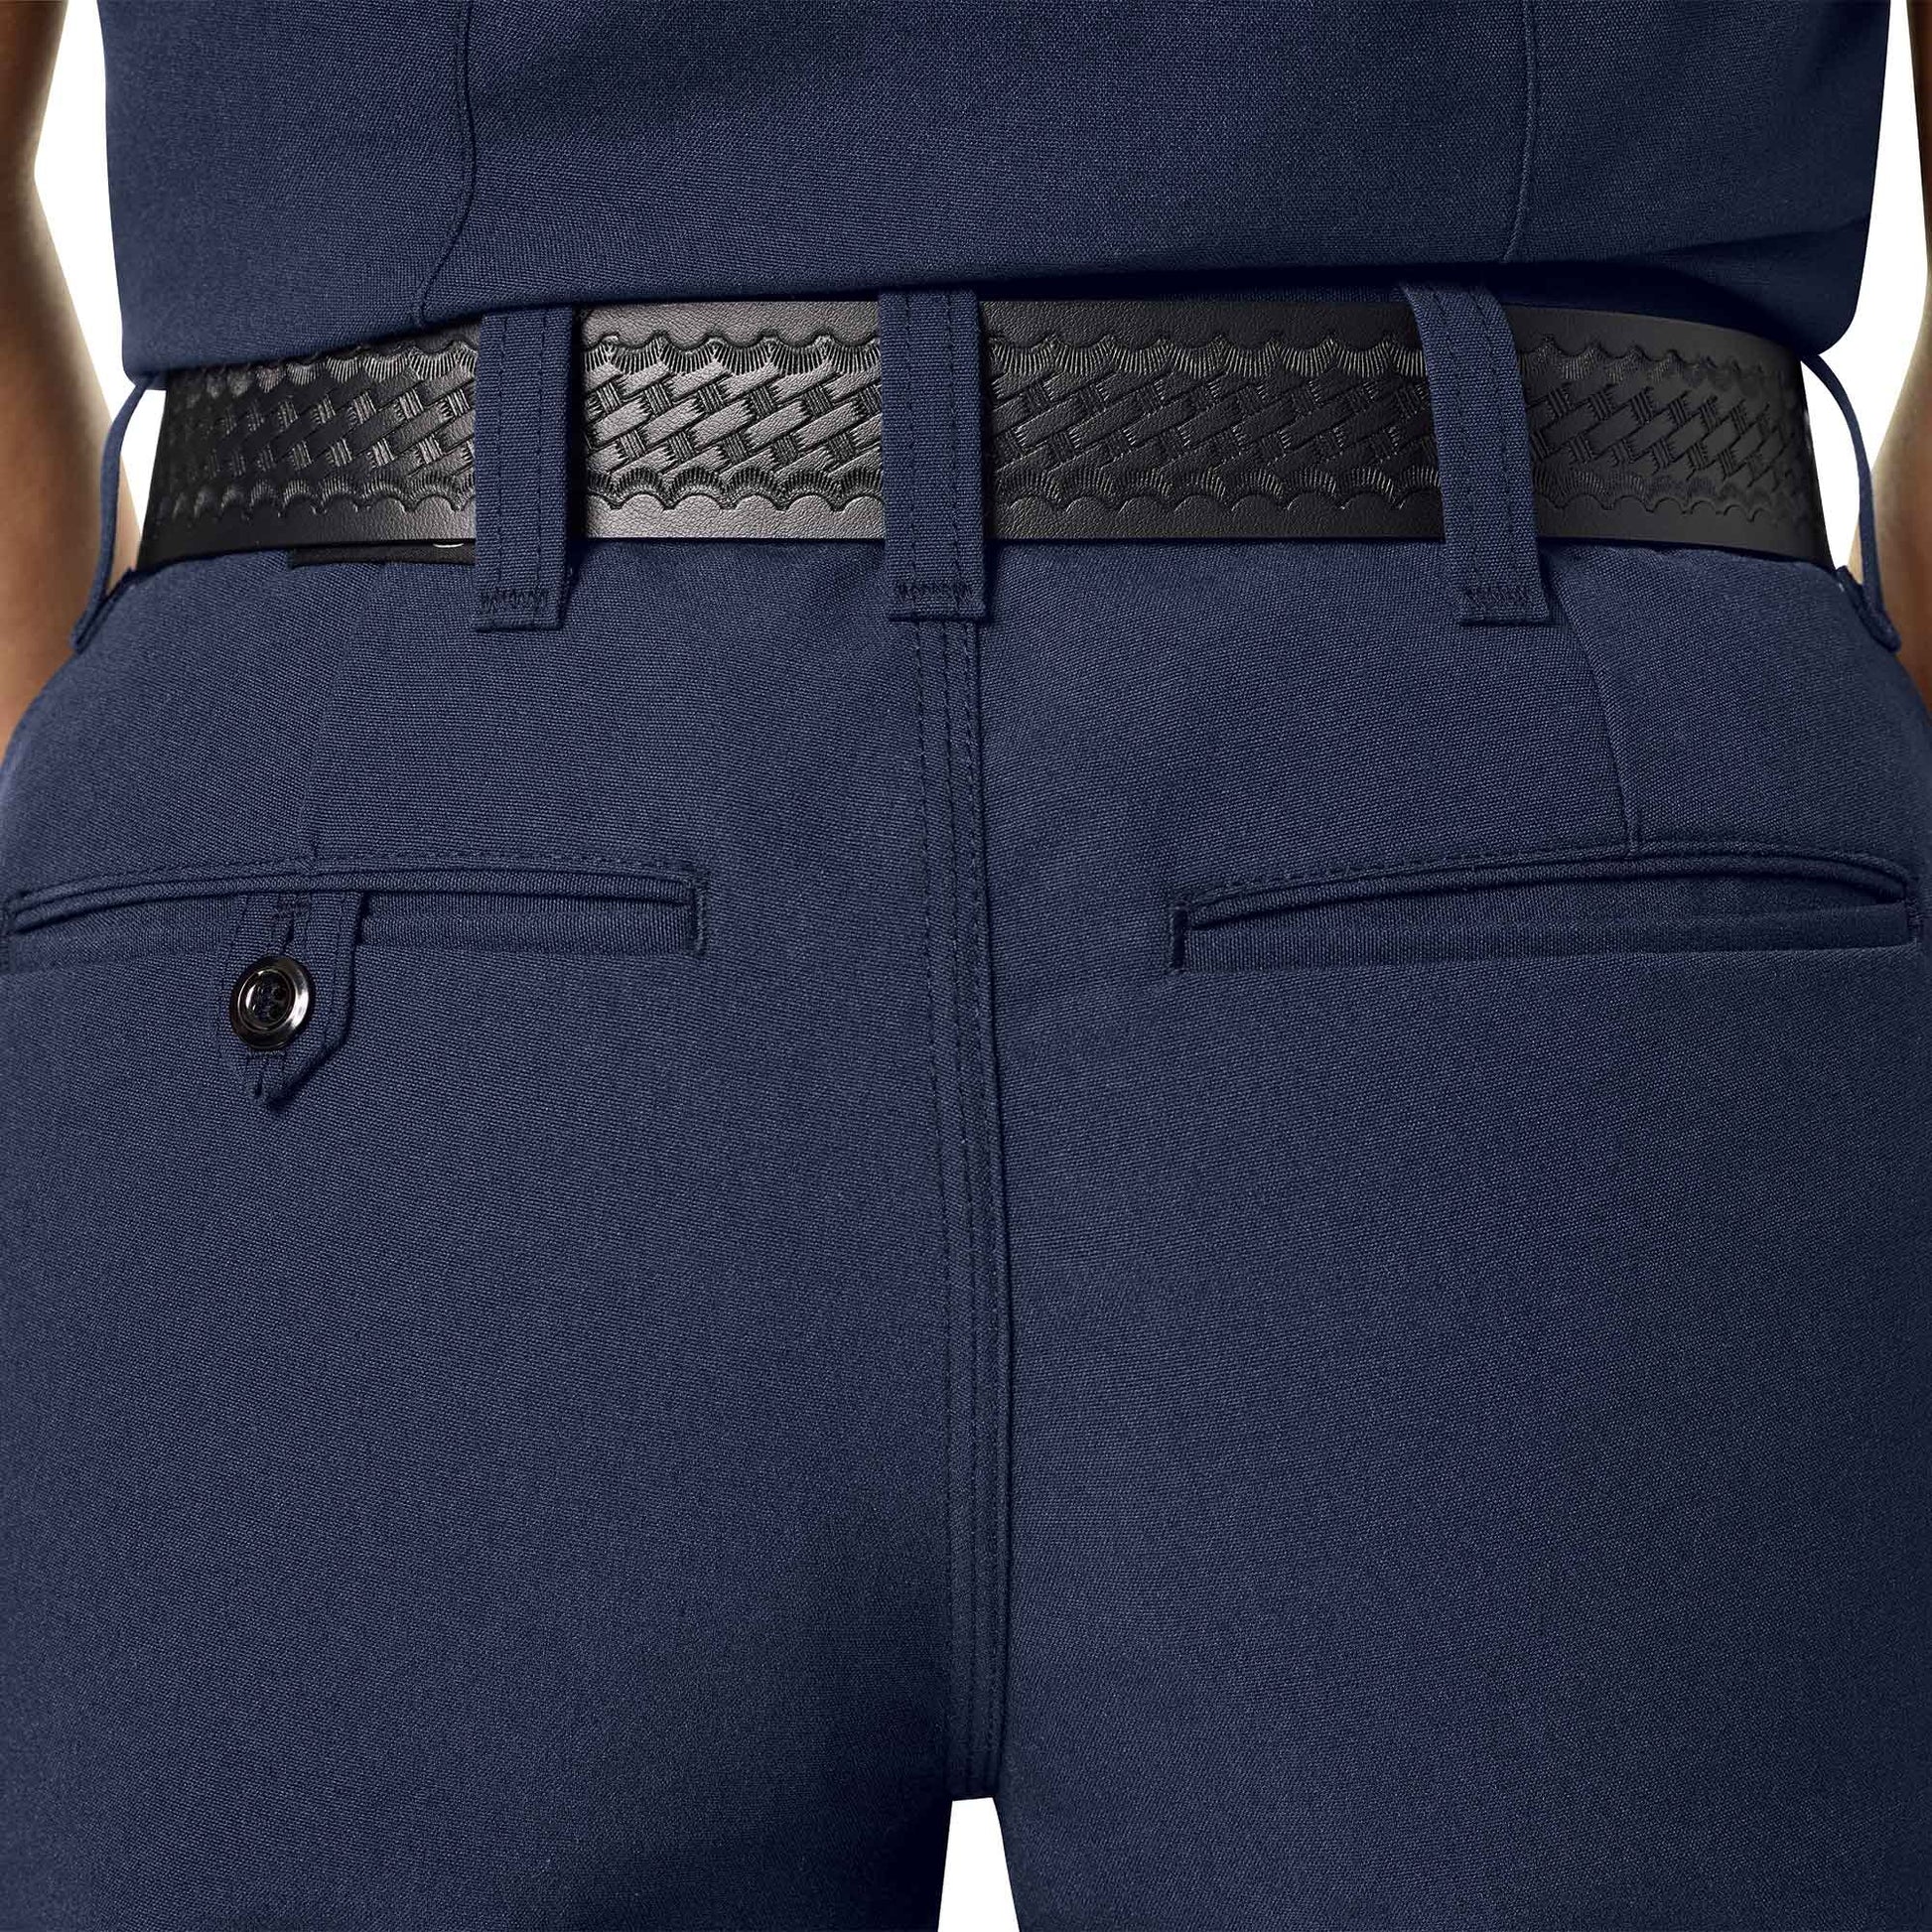 Women's Classic Firefighter Pant